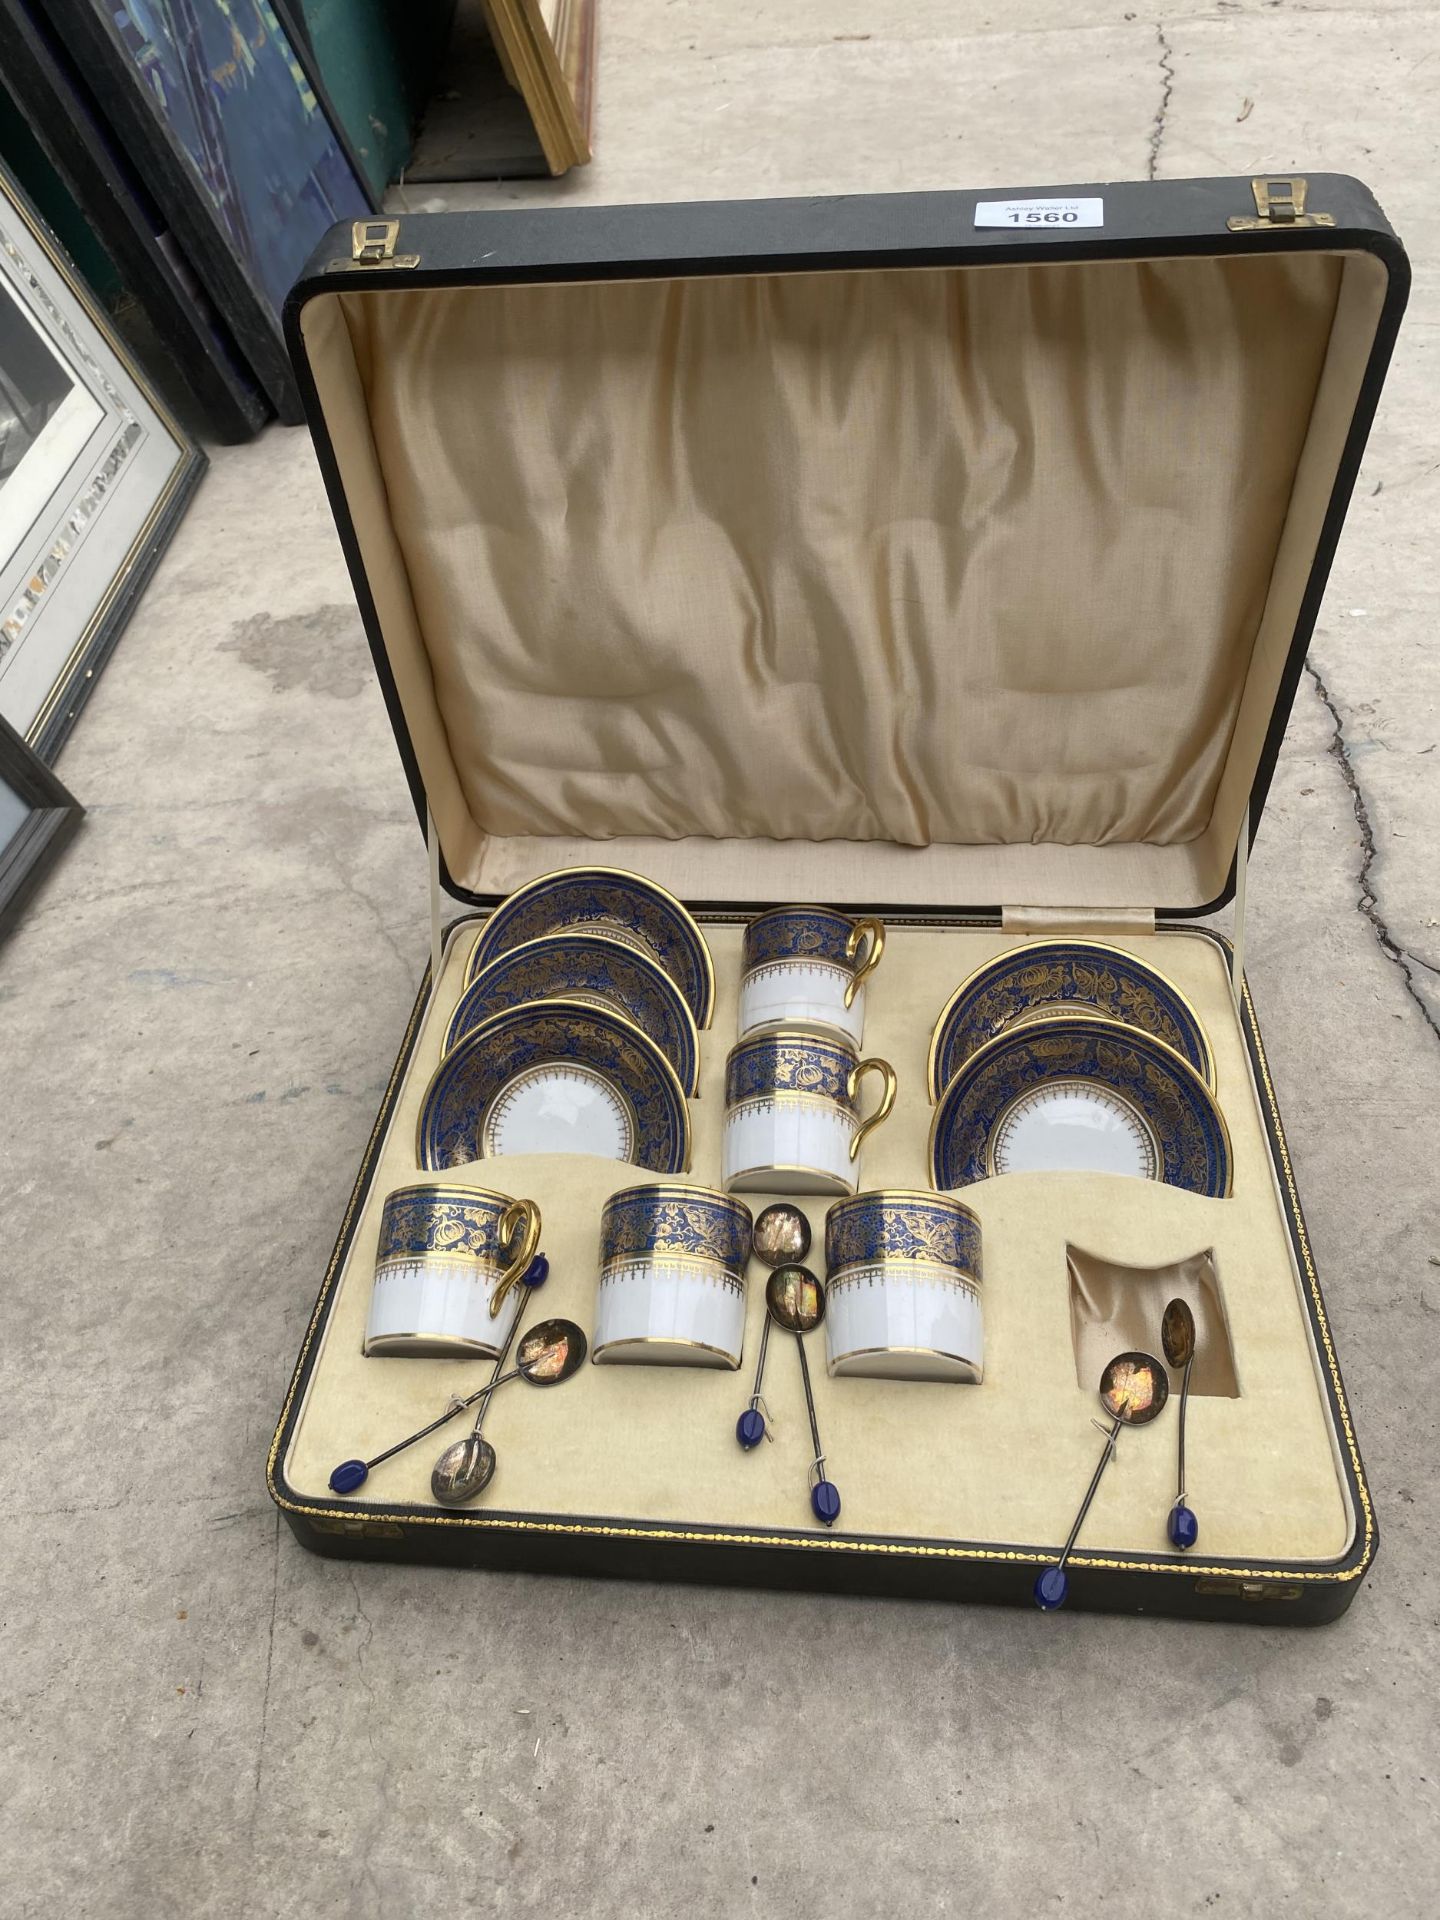 A CASED SIX PIECE COFFEE SET WITH SIX HALLMARKED SILVER COFFEE BEAN SPOONS (ONE CUP AND SAUCER